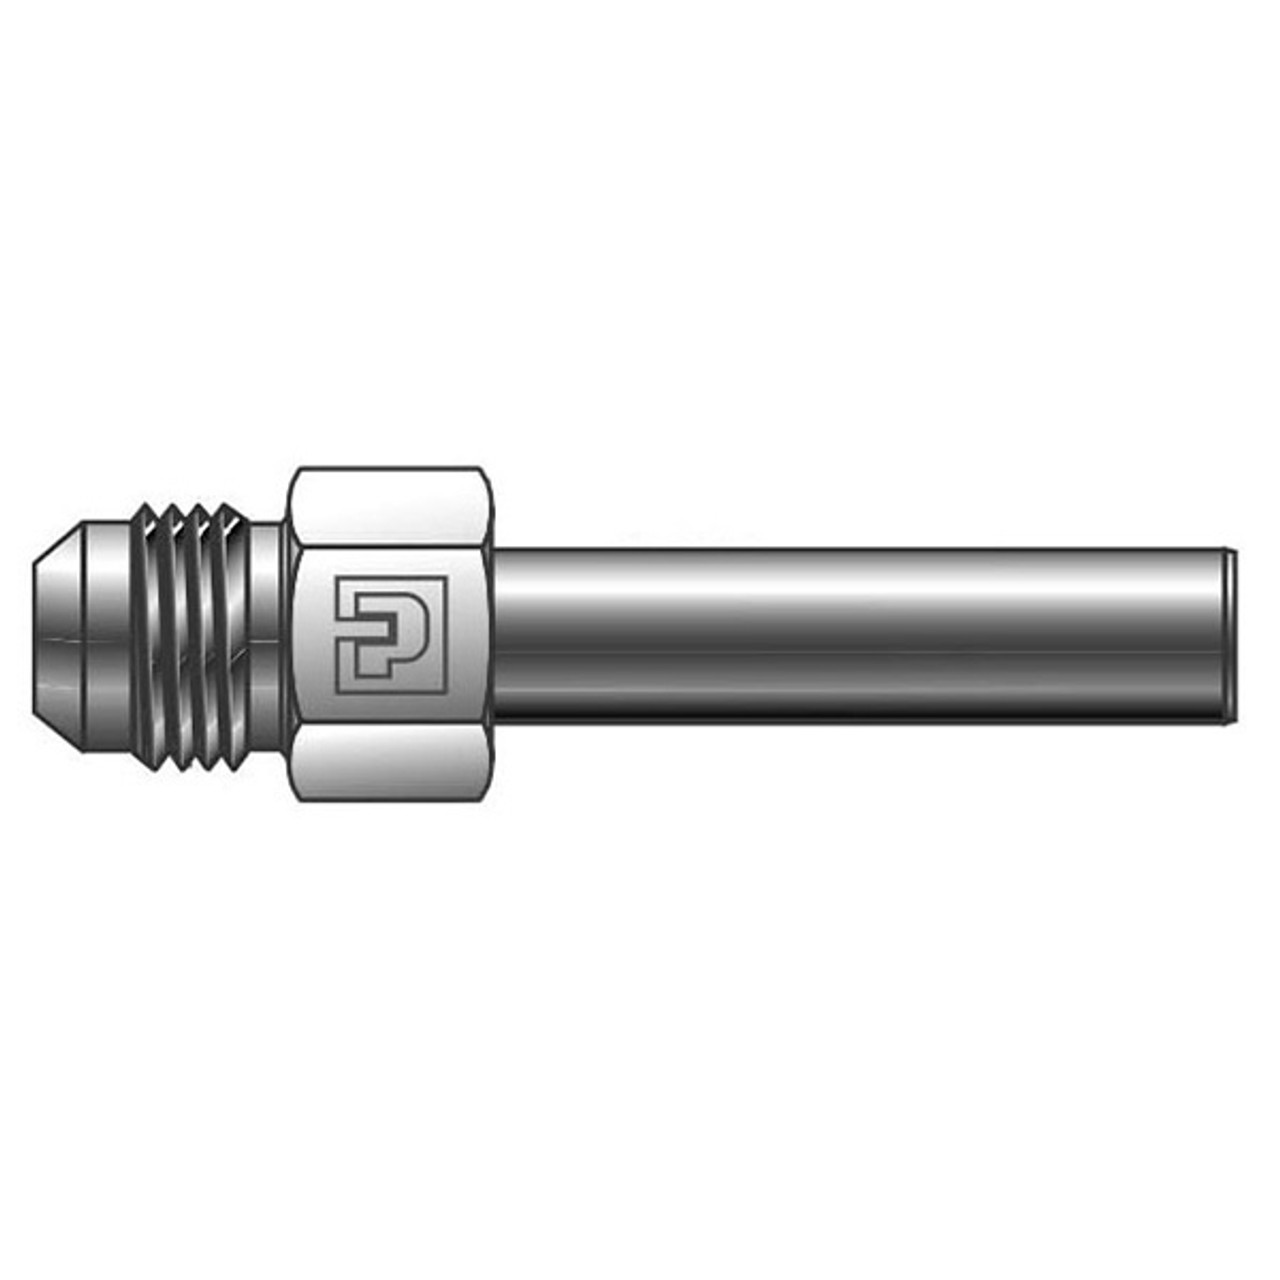 Parker SS Hydraulic Fittings, Size: 1 inch-2 inch at Rs 100/piece